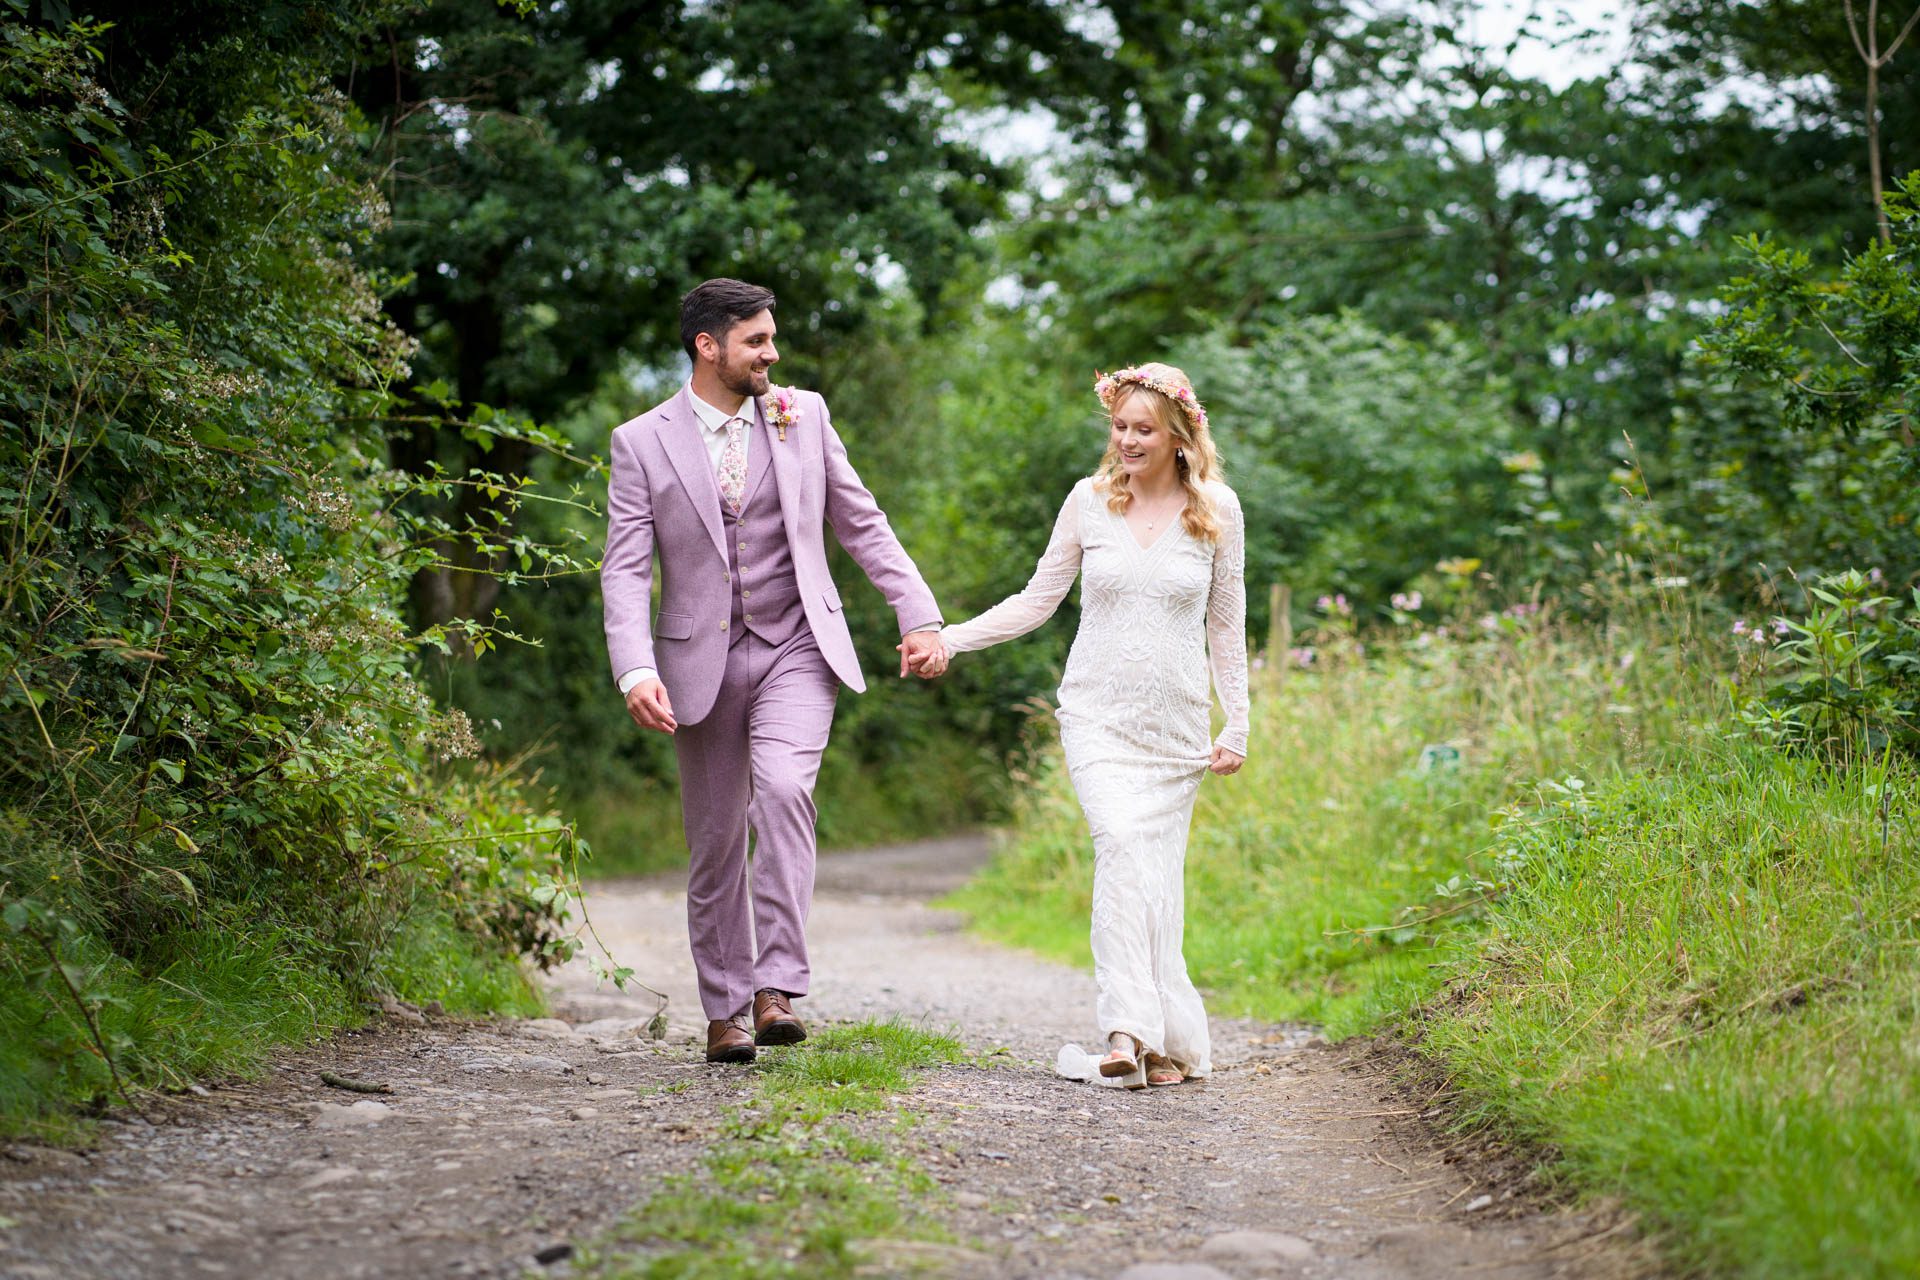 Wedding portrait at Ribble Valley wedding - bride and groom laughing as they walk towards camera